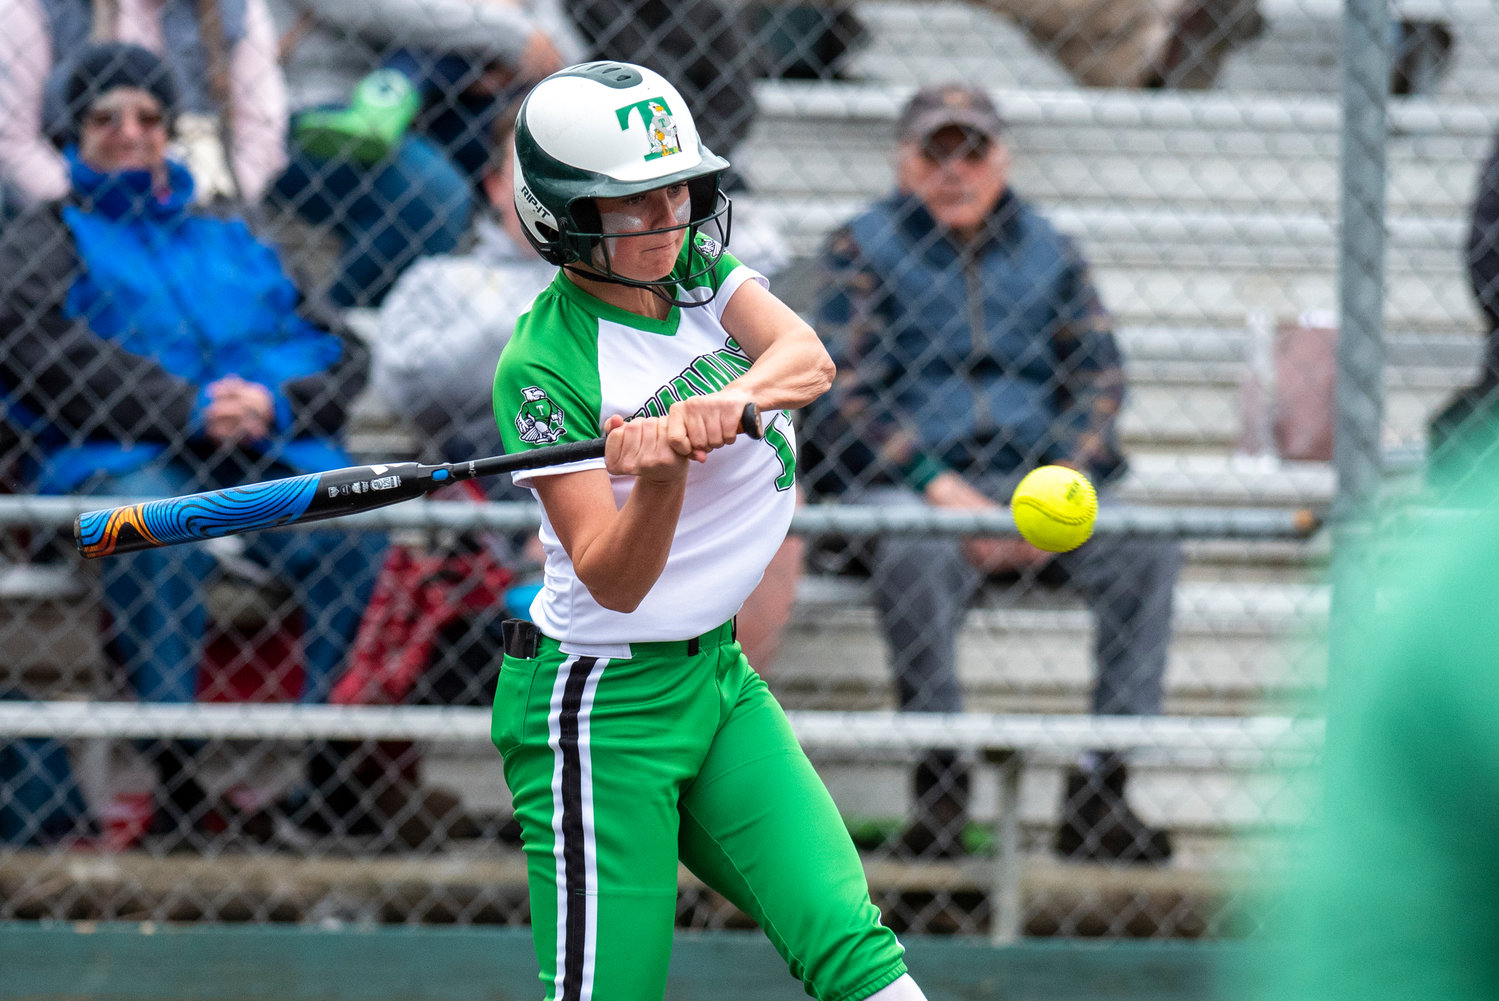 Tumwater's Aly Waltermeyer lines up a W.F. West pitch during a home game on May 2.